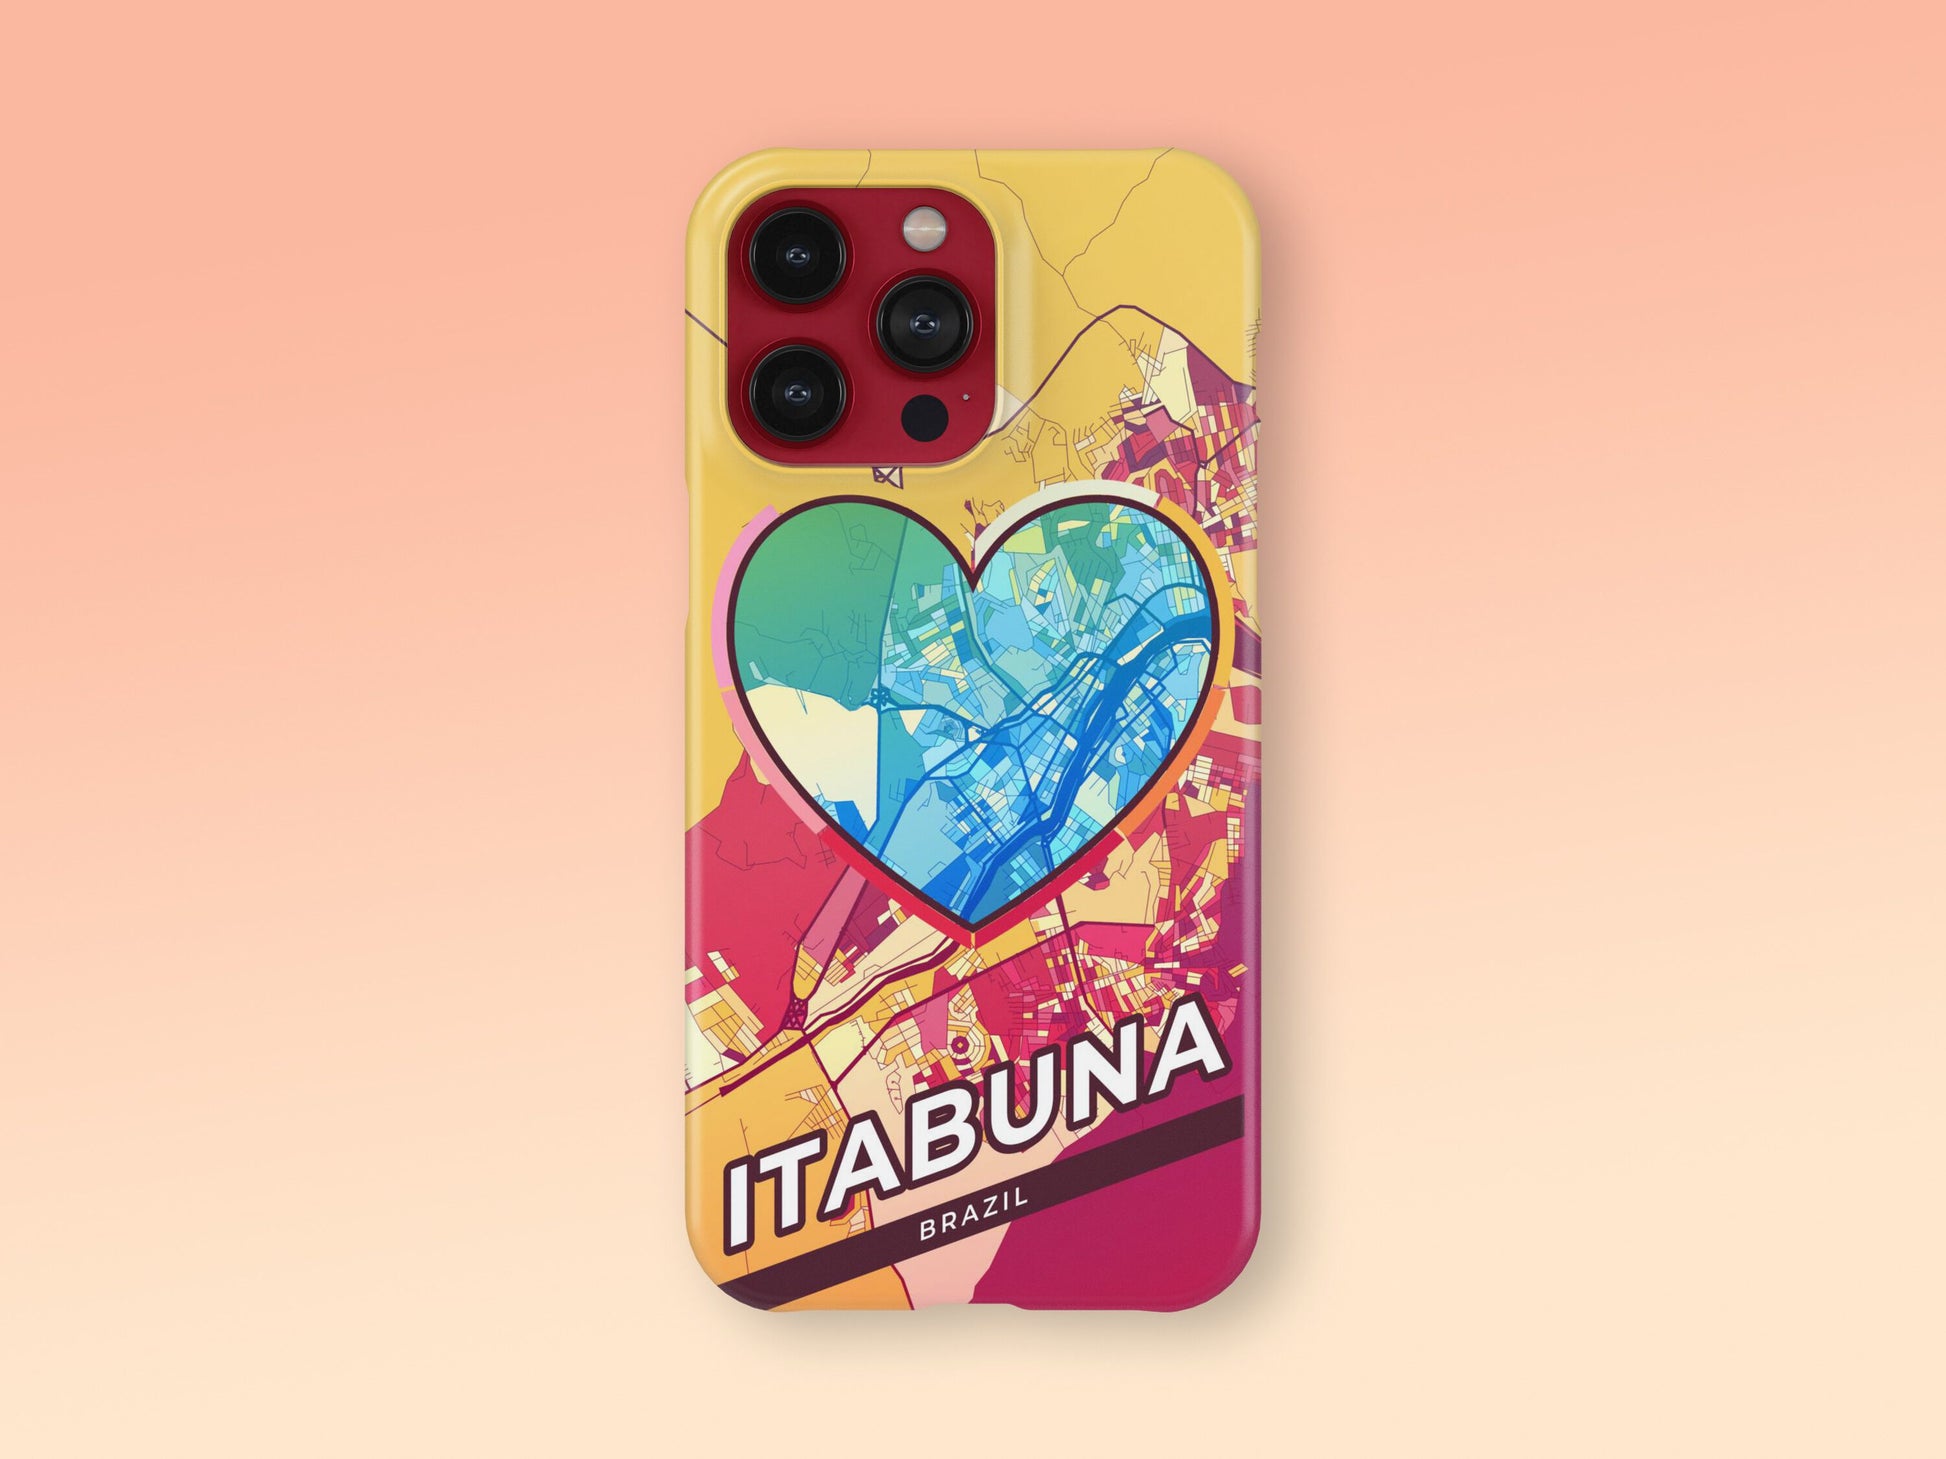 Itabuna Brazil slim phone case with colorful icon. Birthday, wedding or housewarming gift. Couple match cases. 2